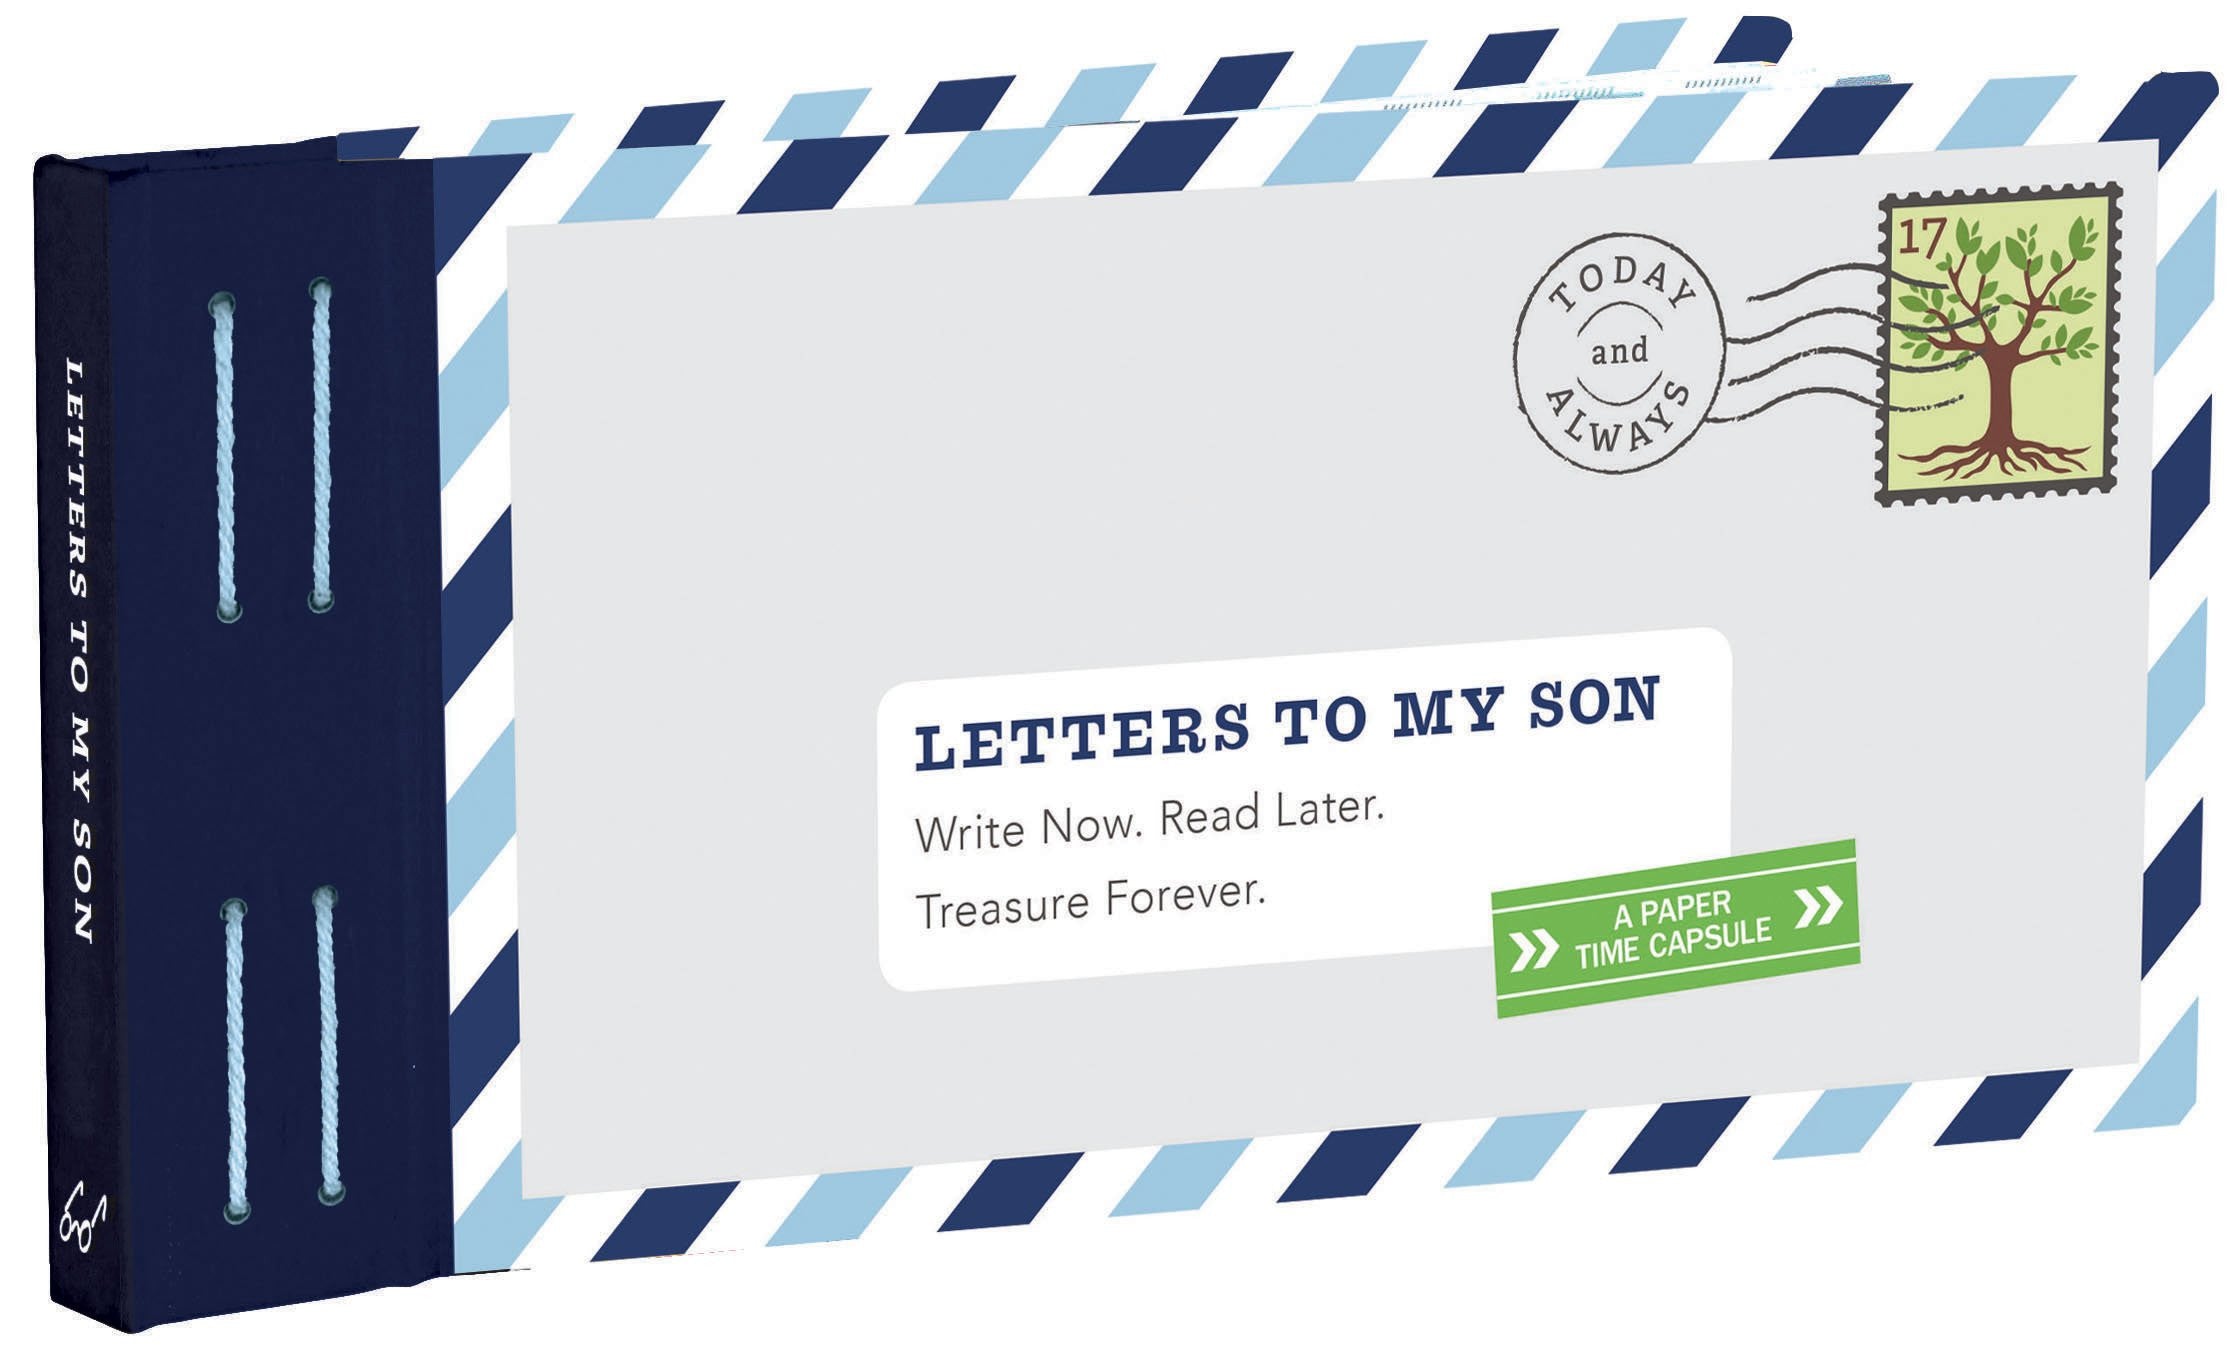 This letter write now. Read later. To my son. My Letter book. Later sons.